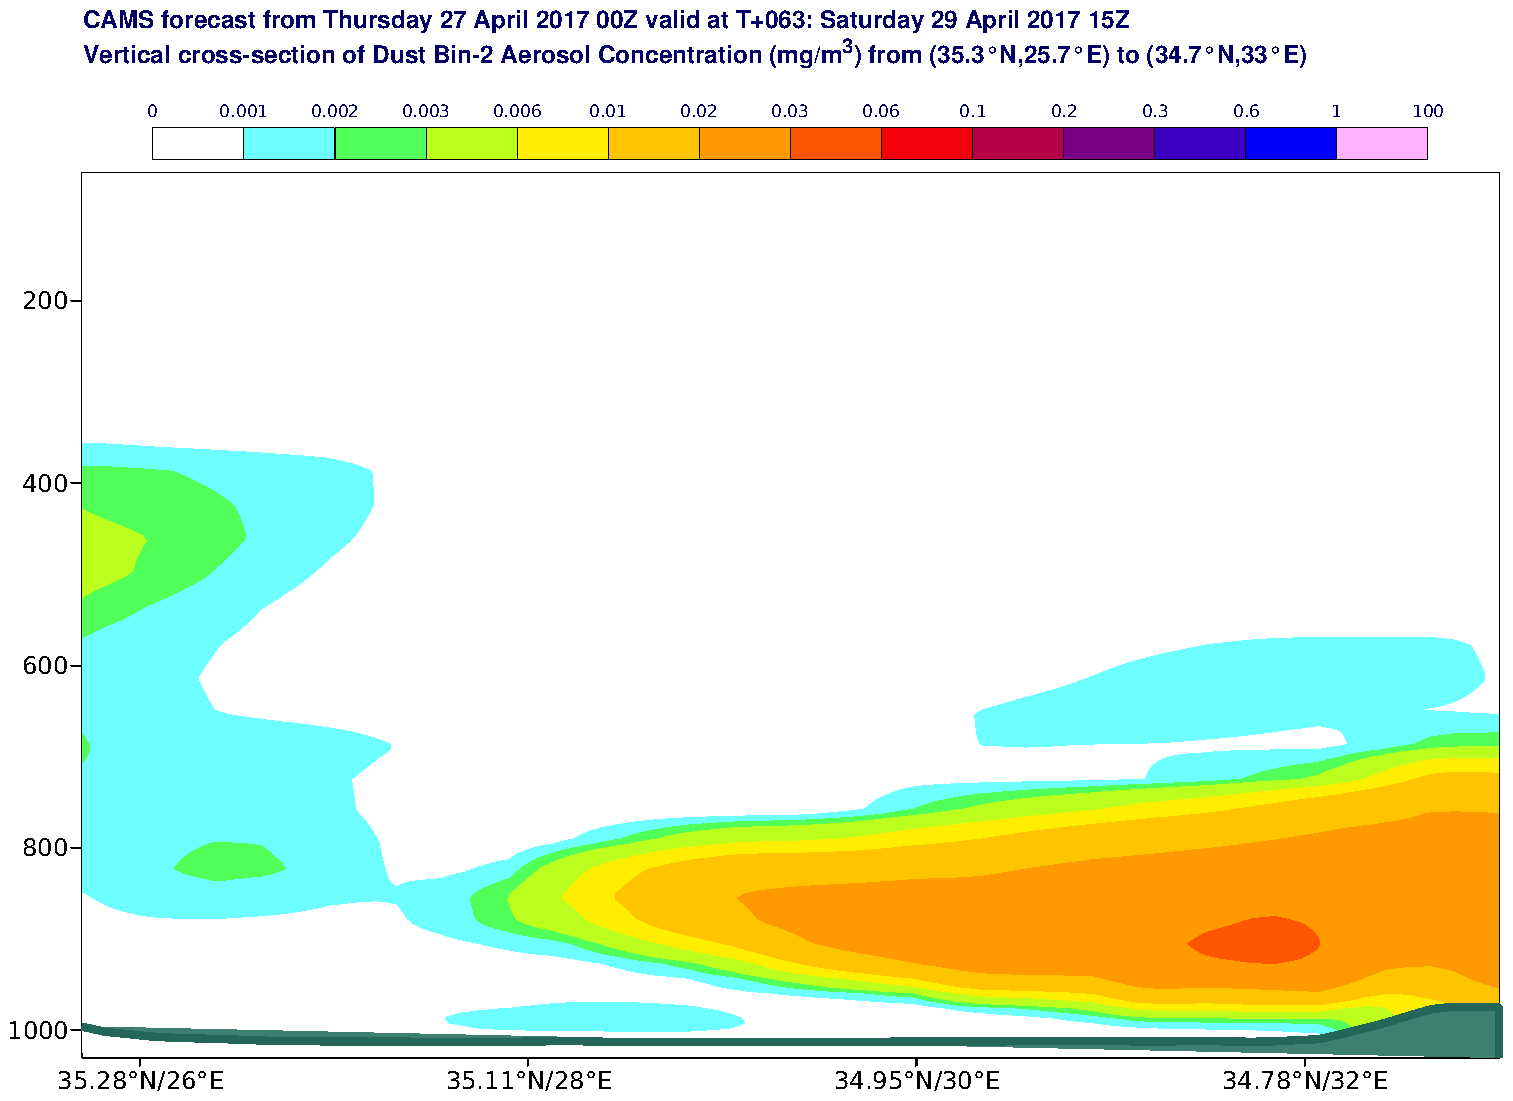 Vertical cross-section of Dust Bin-2 Aerosol Concentration (mg/m3) valid at T63 - 2017-04-29 15:00